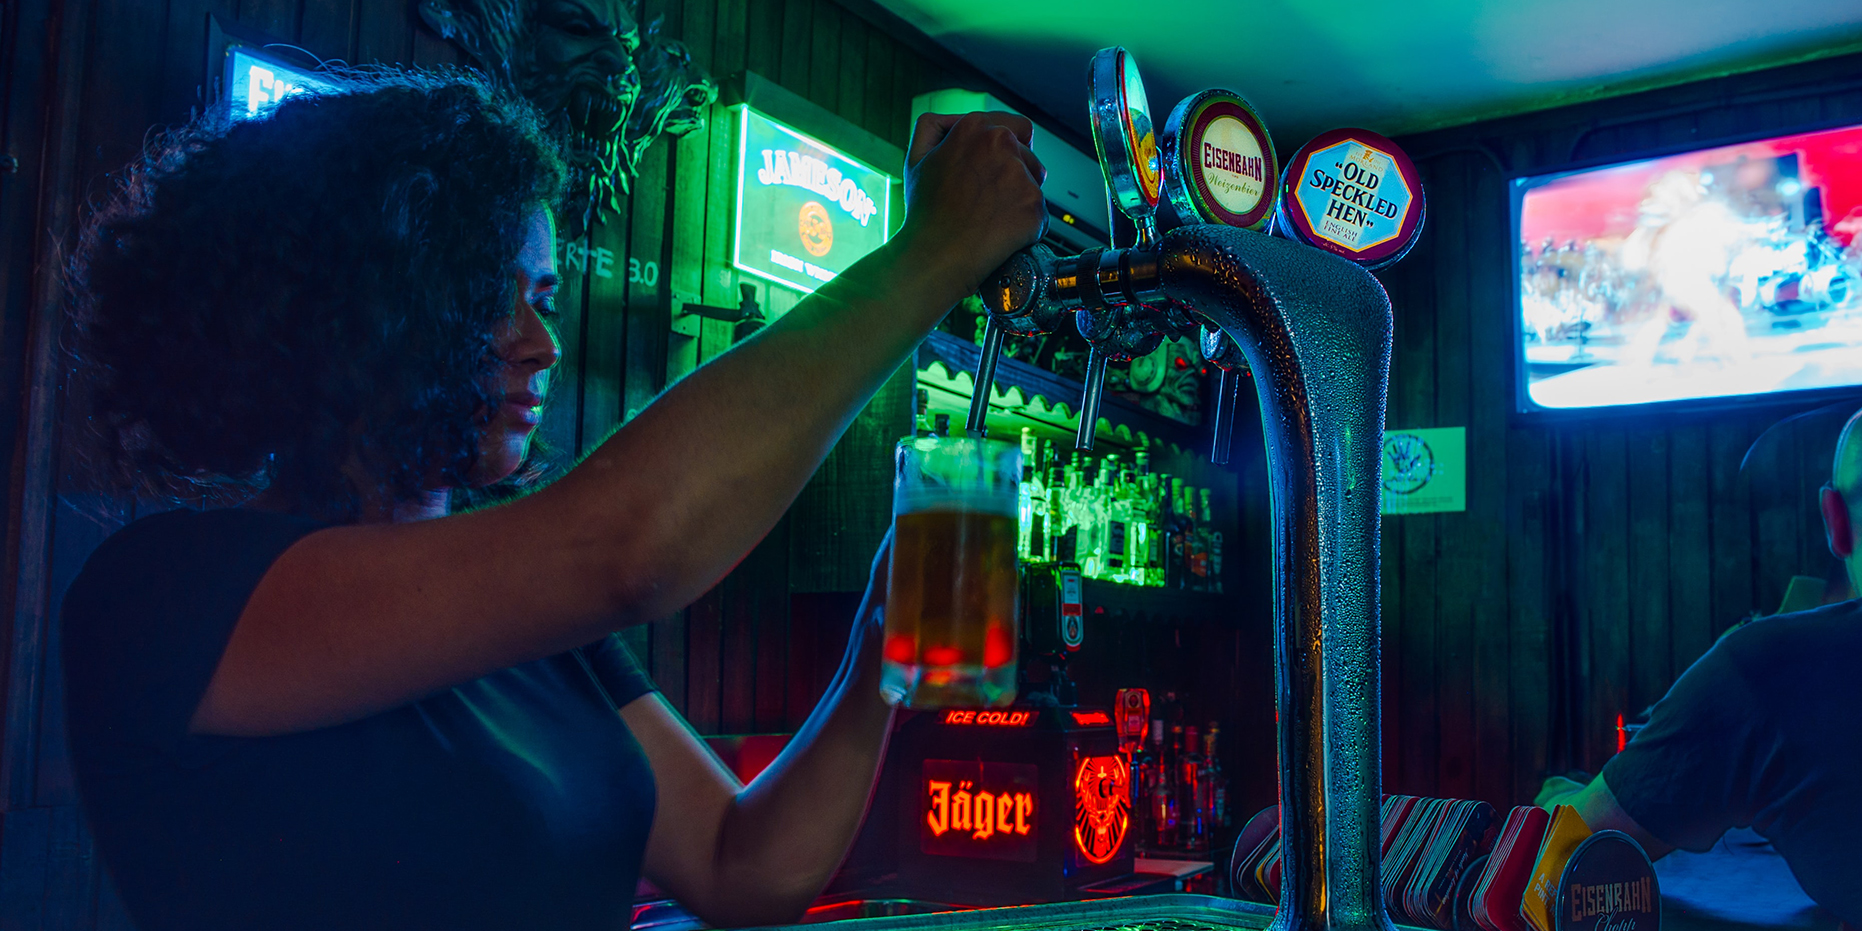 A woman with curly hair in a dark bar pours a draft from a spigot.